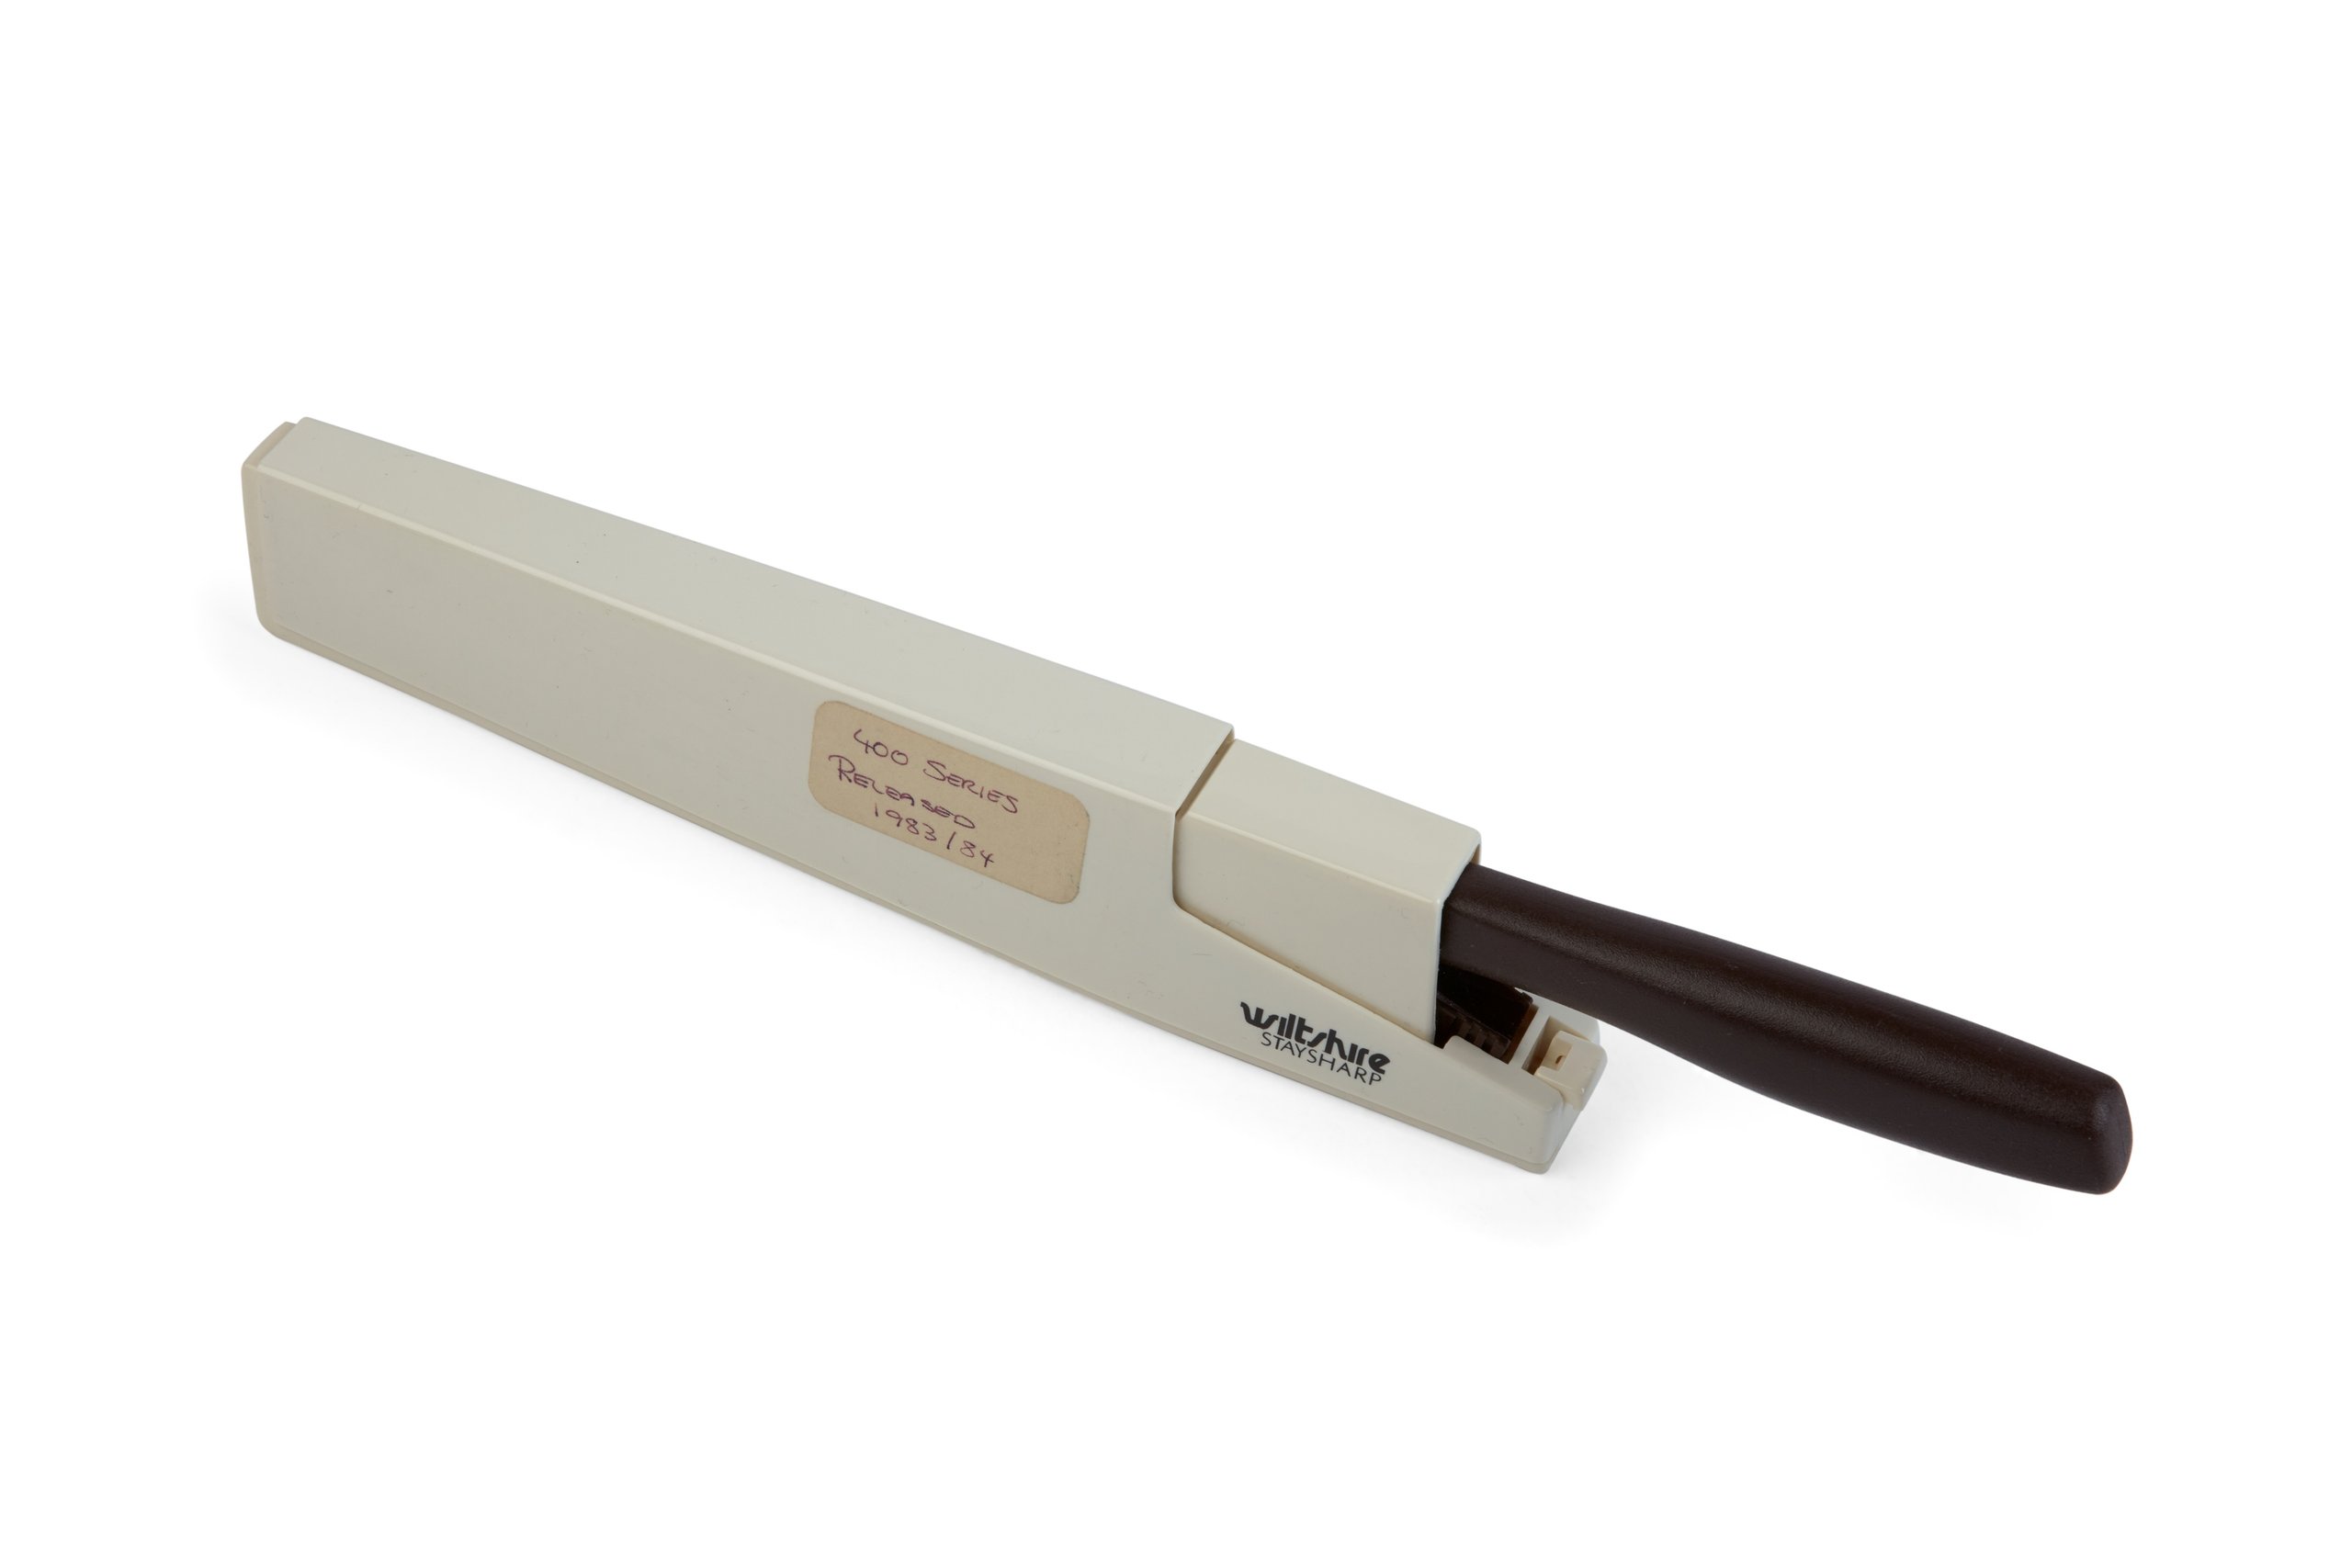 Wiltshire Staysharp knife and scabbard series 400